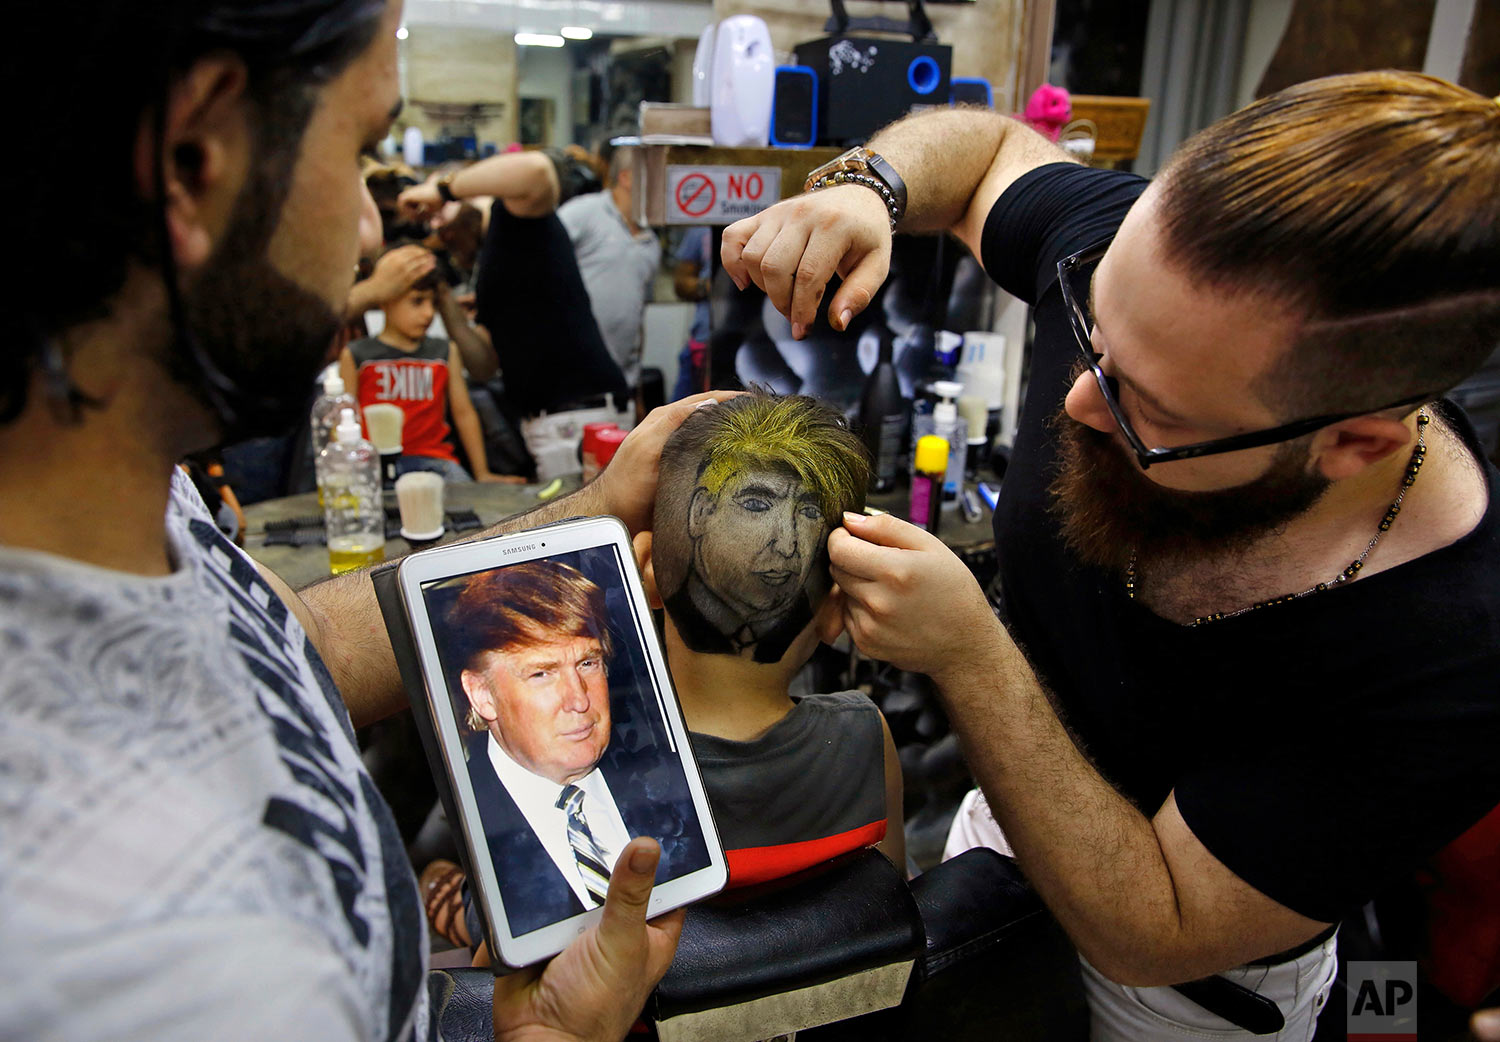 Muhannad Khaled Omar, right, prepares an image of U.S. President Donald Trump on the back of a customer's head at his barber shop in Burj al-Barajneh, southern Beirut, Lebanon on July 14, 2017. (AP Photo/Bilal Hussein)